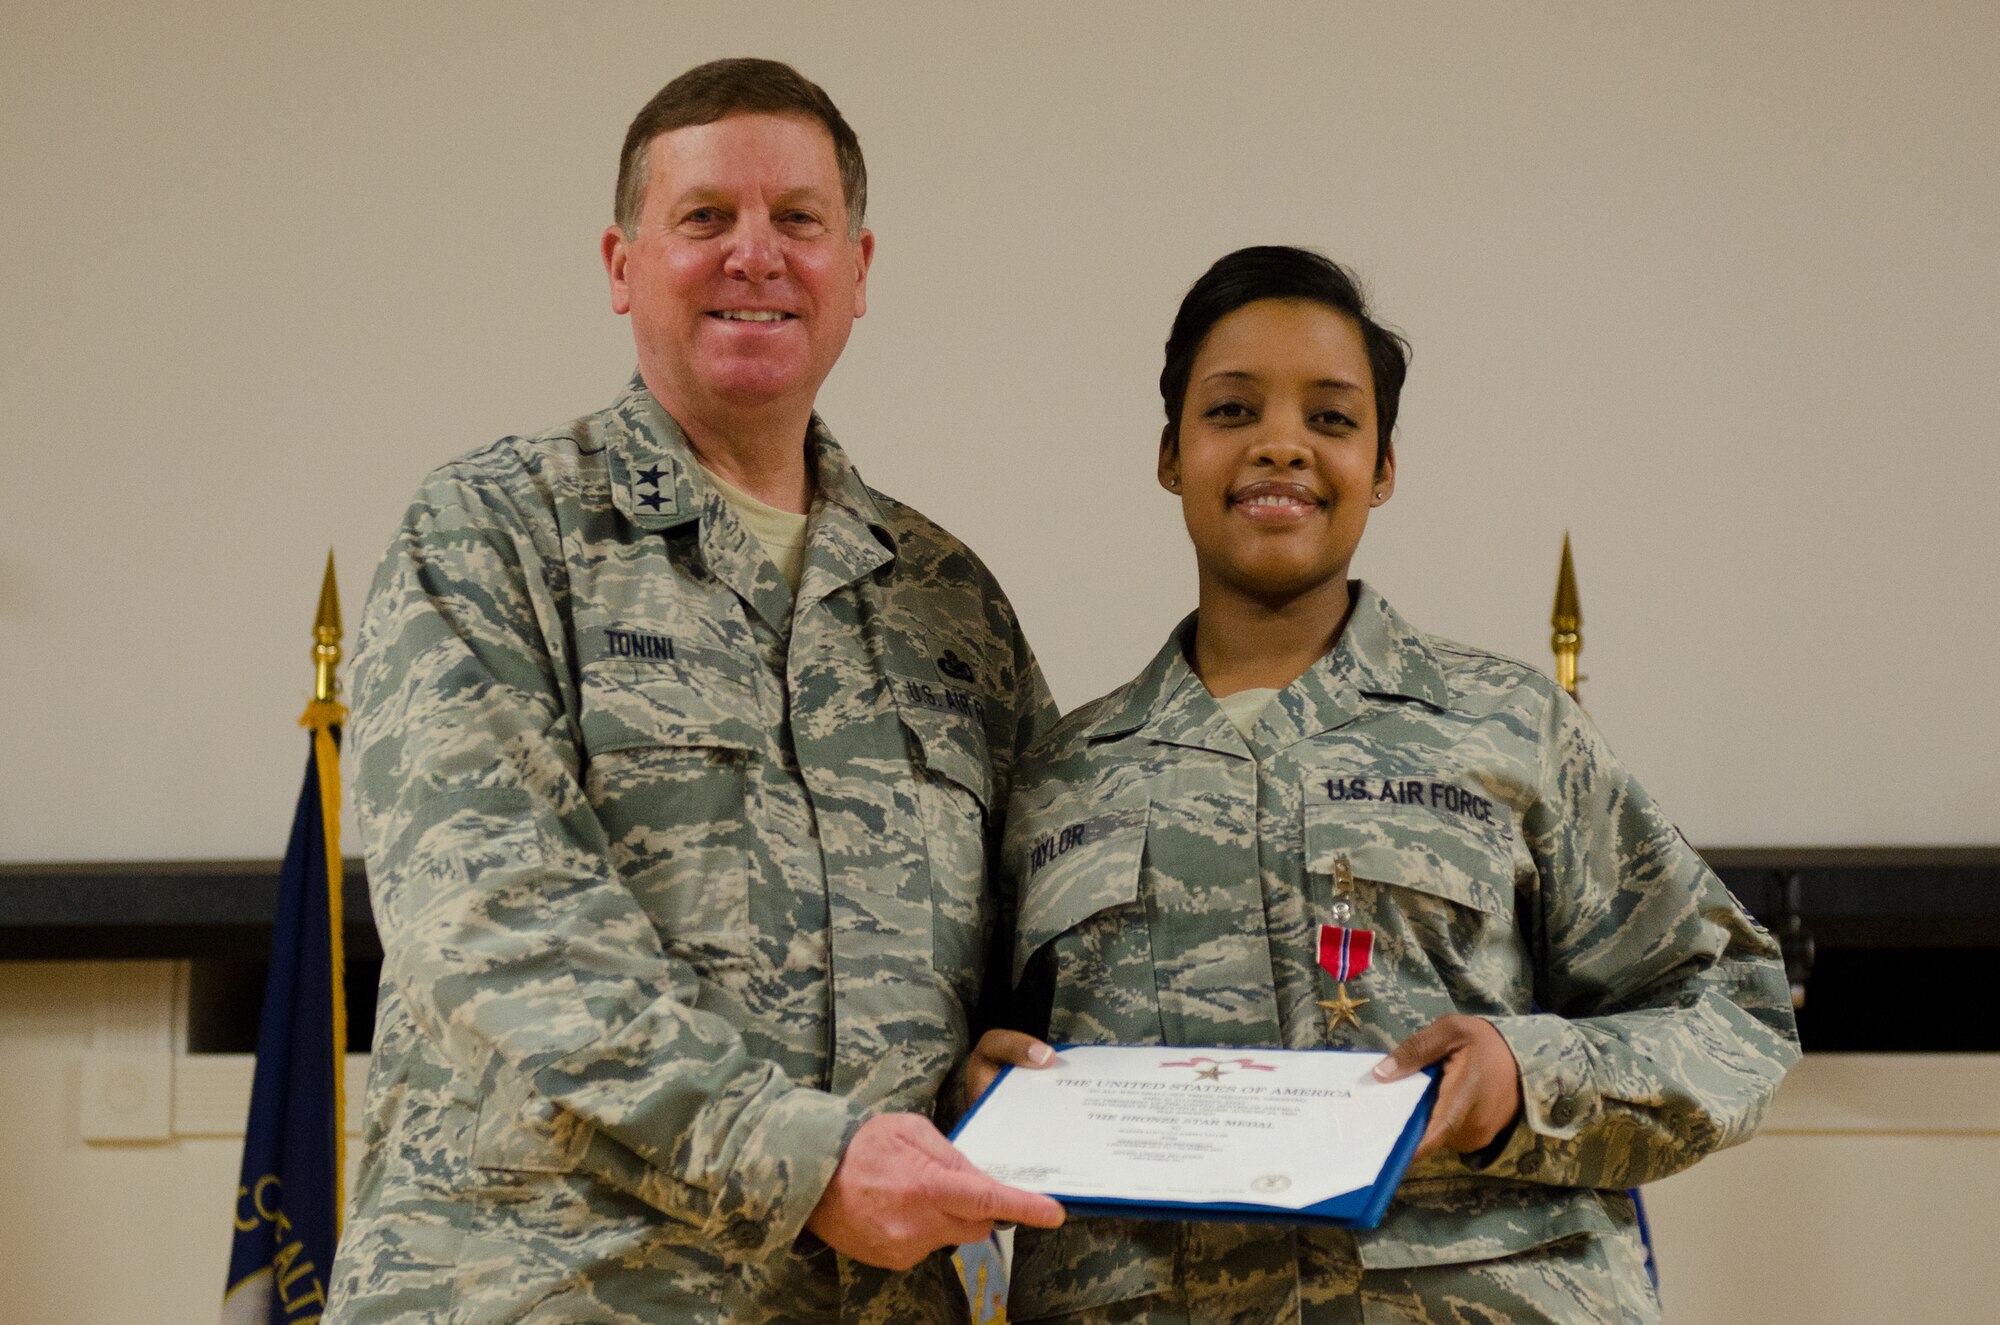 Kentucky’s adjutant general, Maj. Gen. Edward W. Tonini, presents Master Sgt. Zakiya Taylor with the Bronze Star Medal during an award ceremony held Jan. 12, 2014 at the Kentucky Air National Guard Base in Louisville, Ky. Taylor earned the award for exceptionally meritorious achievement while serving in Afghanistan as part of Kentucky Agribusiness Development Team V, a multi-disciplinary task force charged with helping the nation develop a sustainable farming economy. (U.S. Air National Guard photo by Airman 1st Class Joshua Horton)